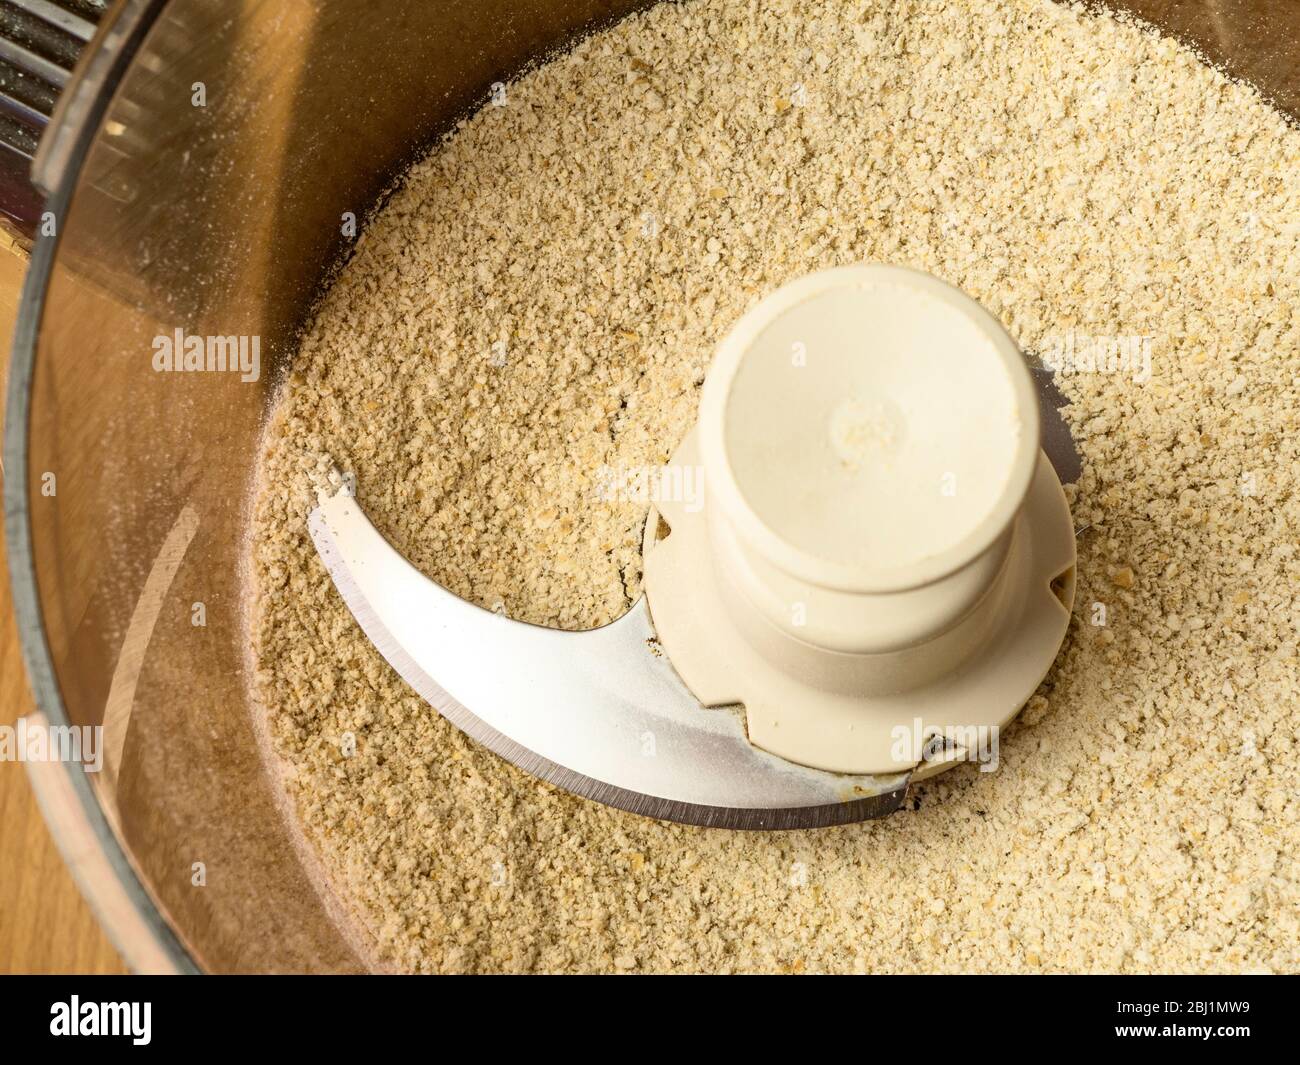 Making oat flour from rolled oats in a food processor for use in oat bread Stock Photo